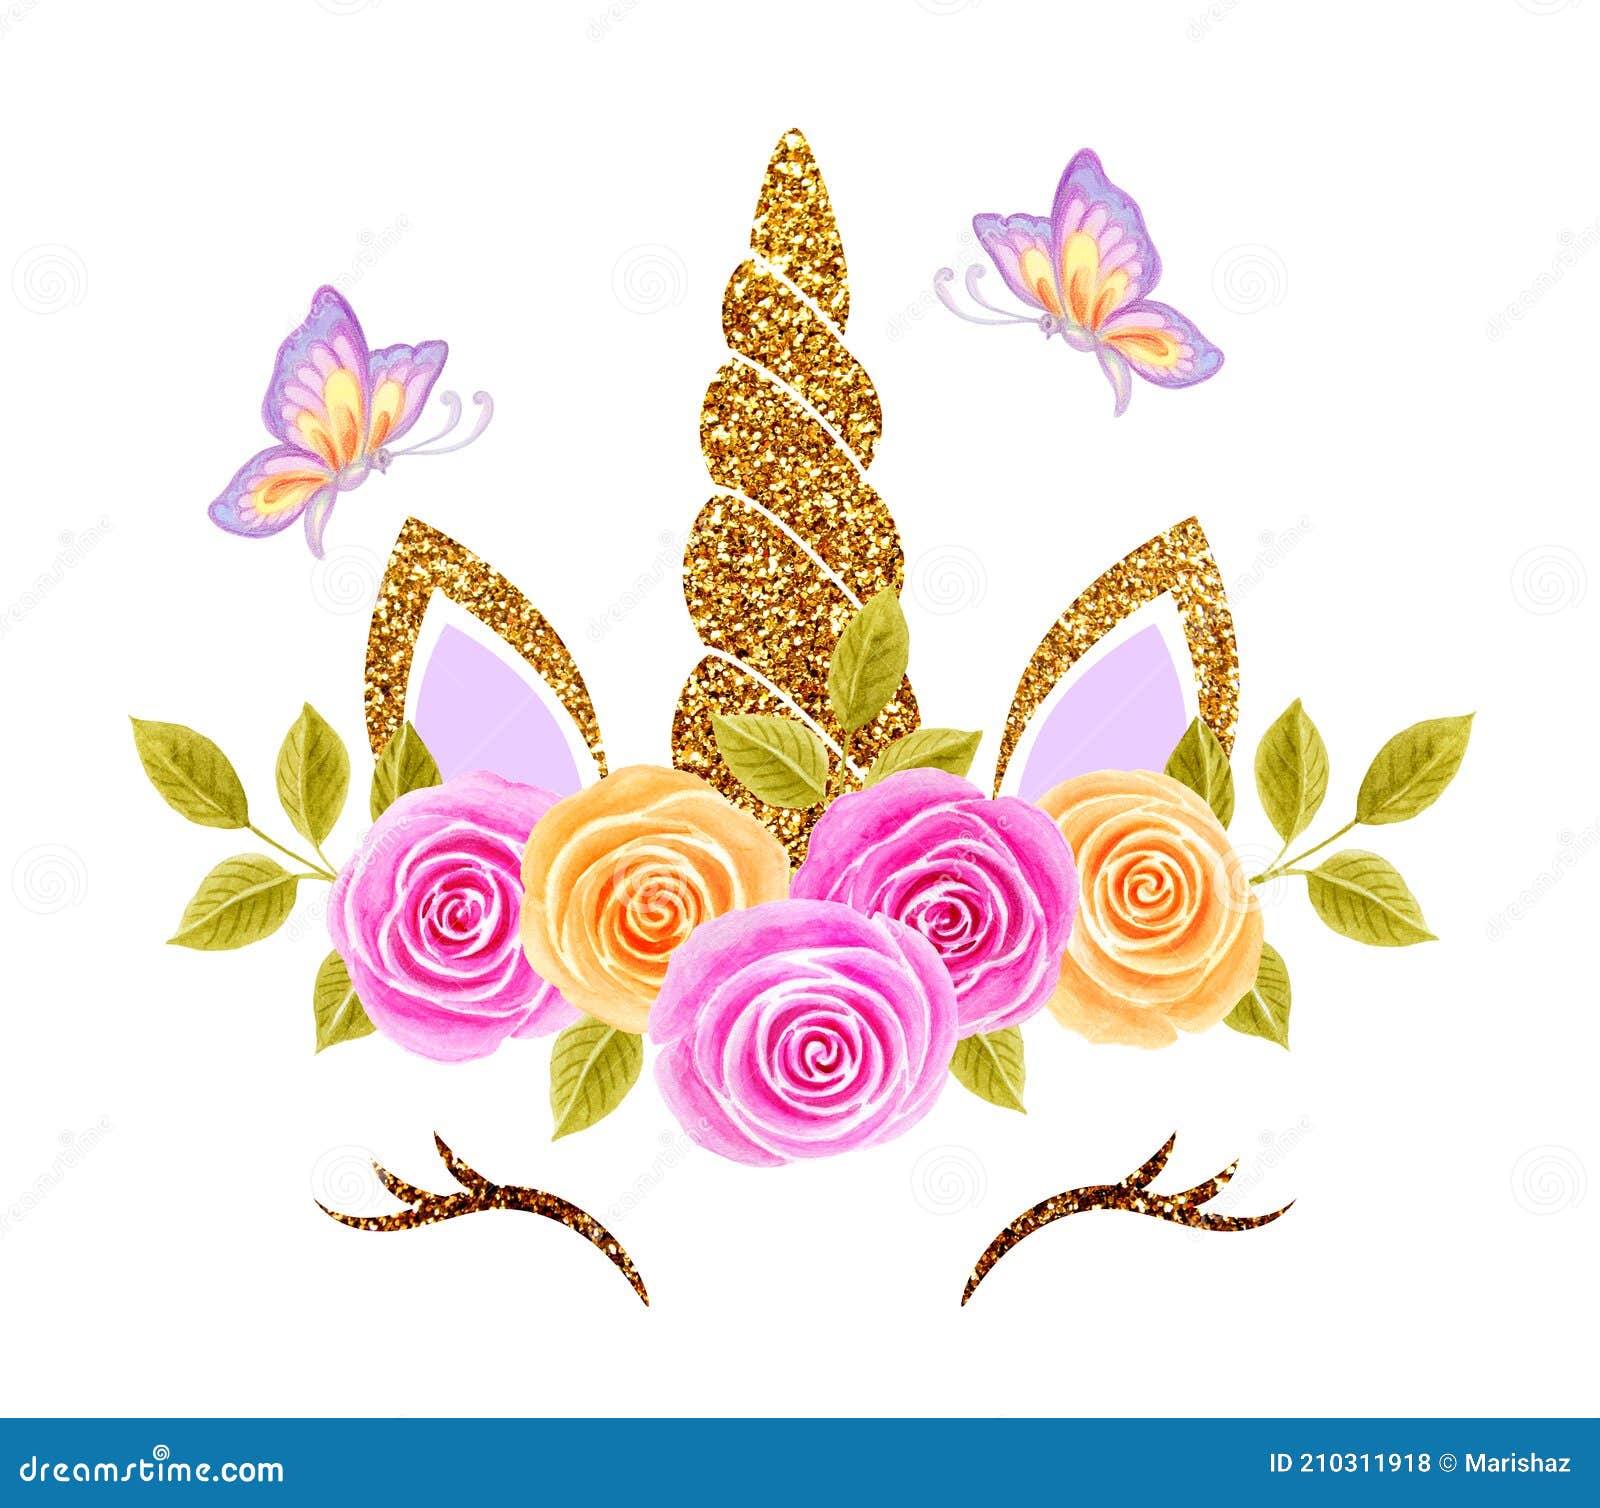 fabulous cute unicorn and butterflies with golden gilded horn and beautiful roses flowers wreath  on white background